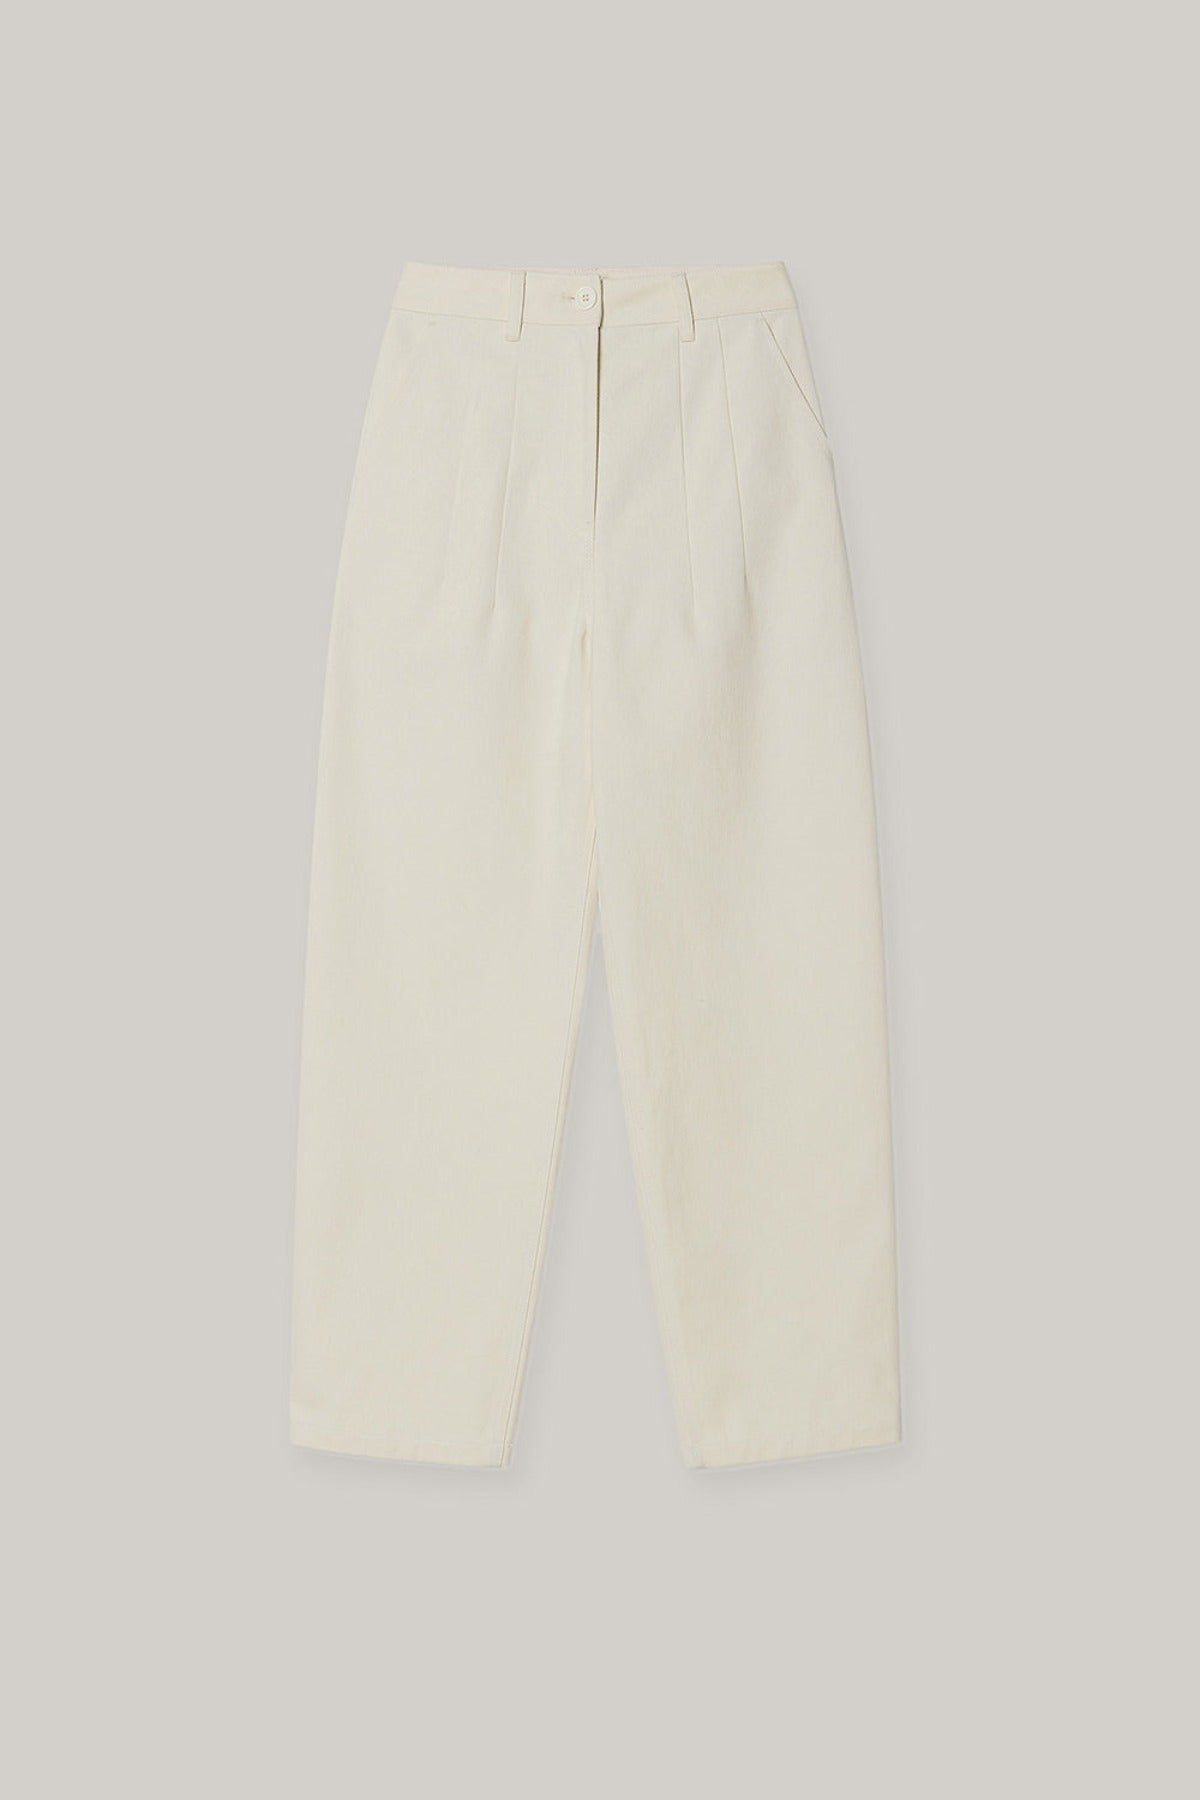 Curved Pants In Ivory